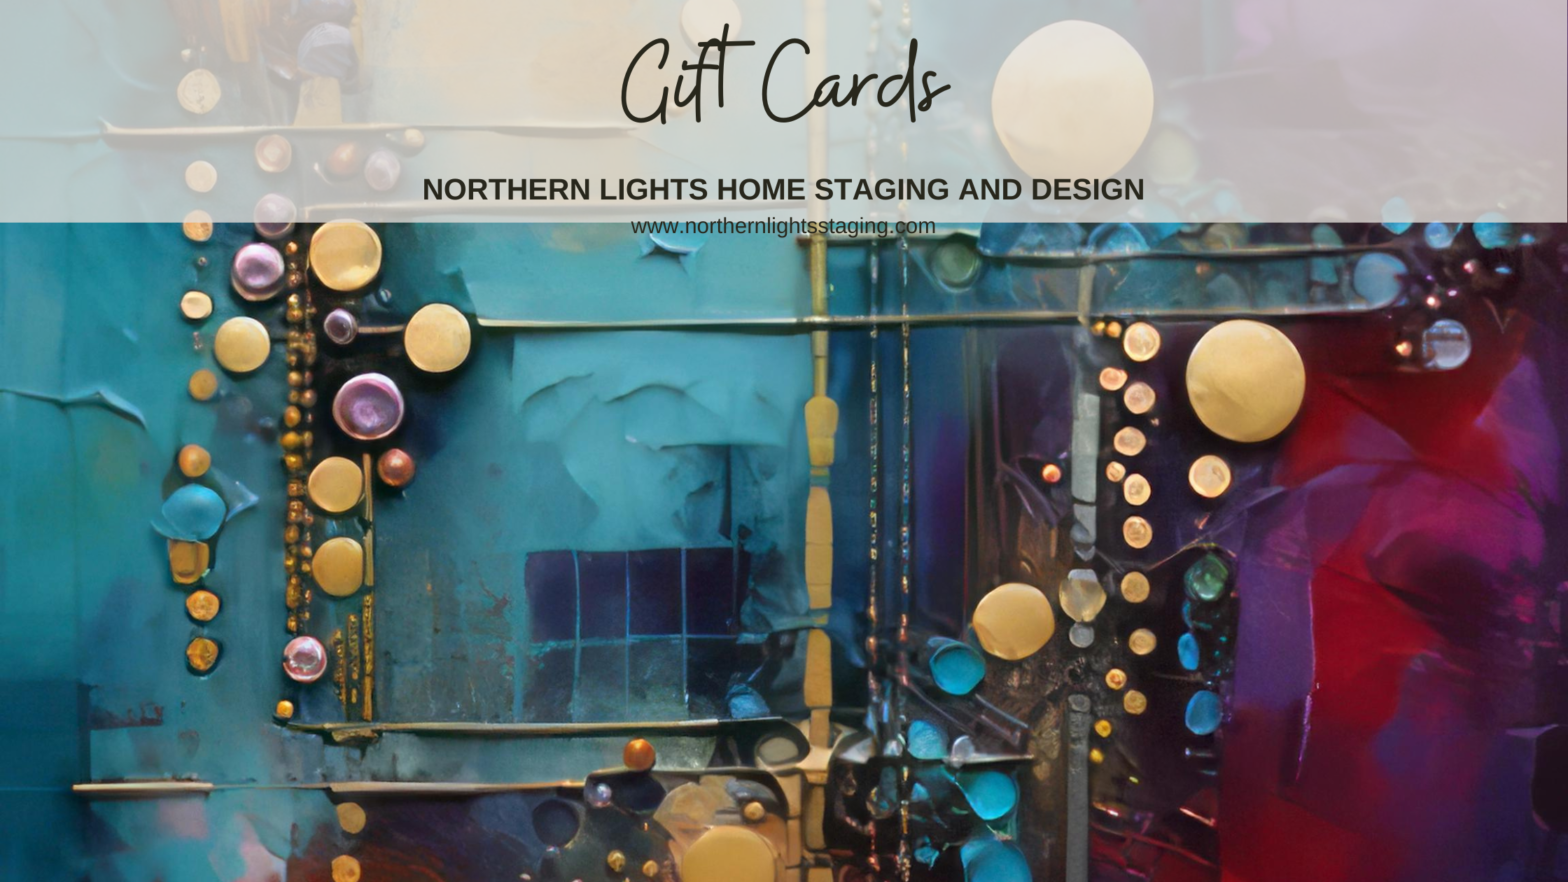 Gift cards for Interior design, color consulting, home staging and energy art from Northern Lights Home Staging and Design